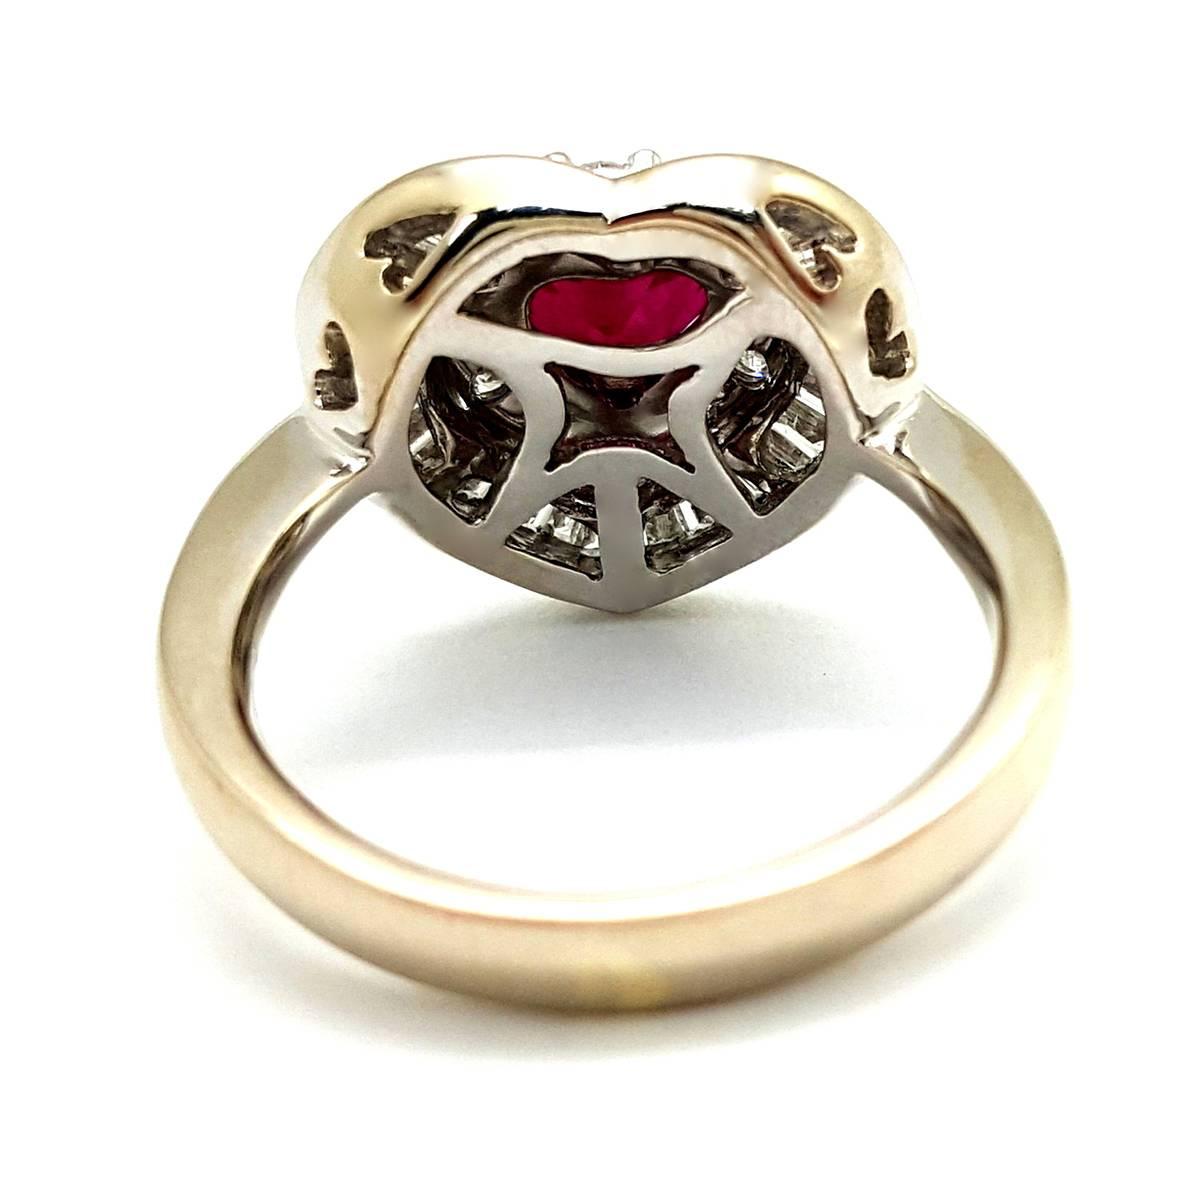 A Beautiful Heart Cut Ruby and Diamond Ring in 18k White Gold For Sale 1